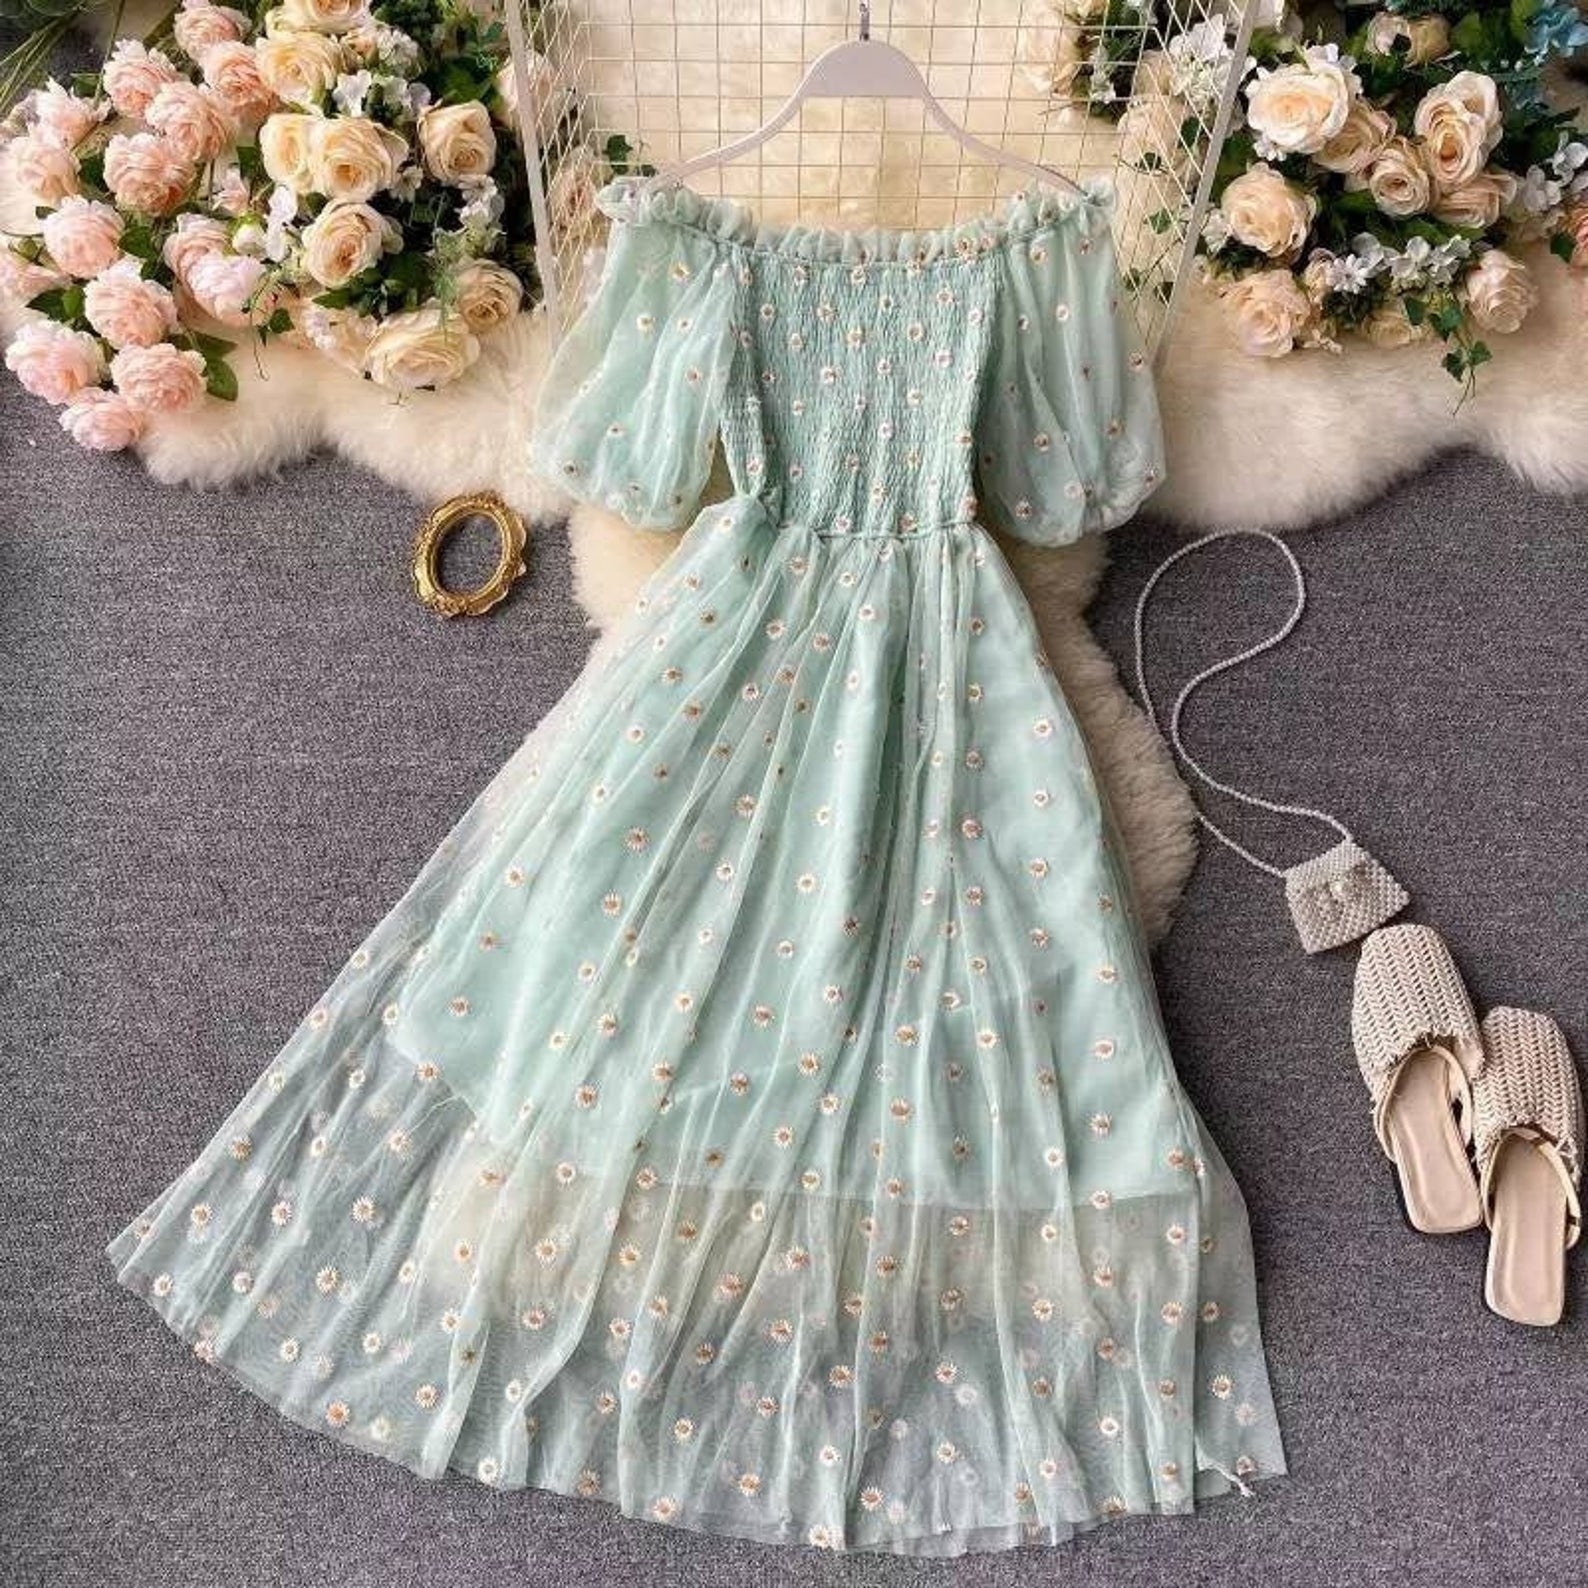 off the shoulder light green dress with puffy sleeves and a sheer overlay with embroidered flowers on it